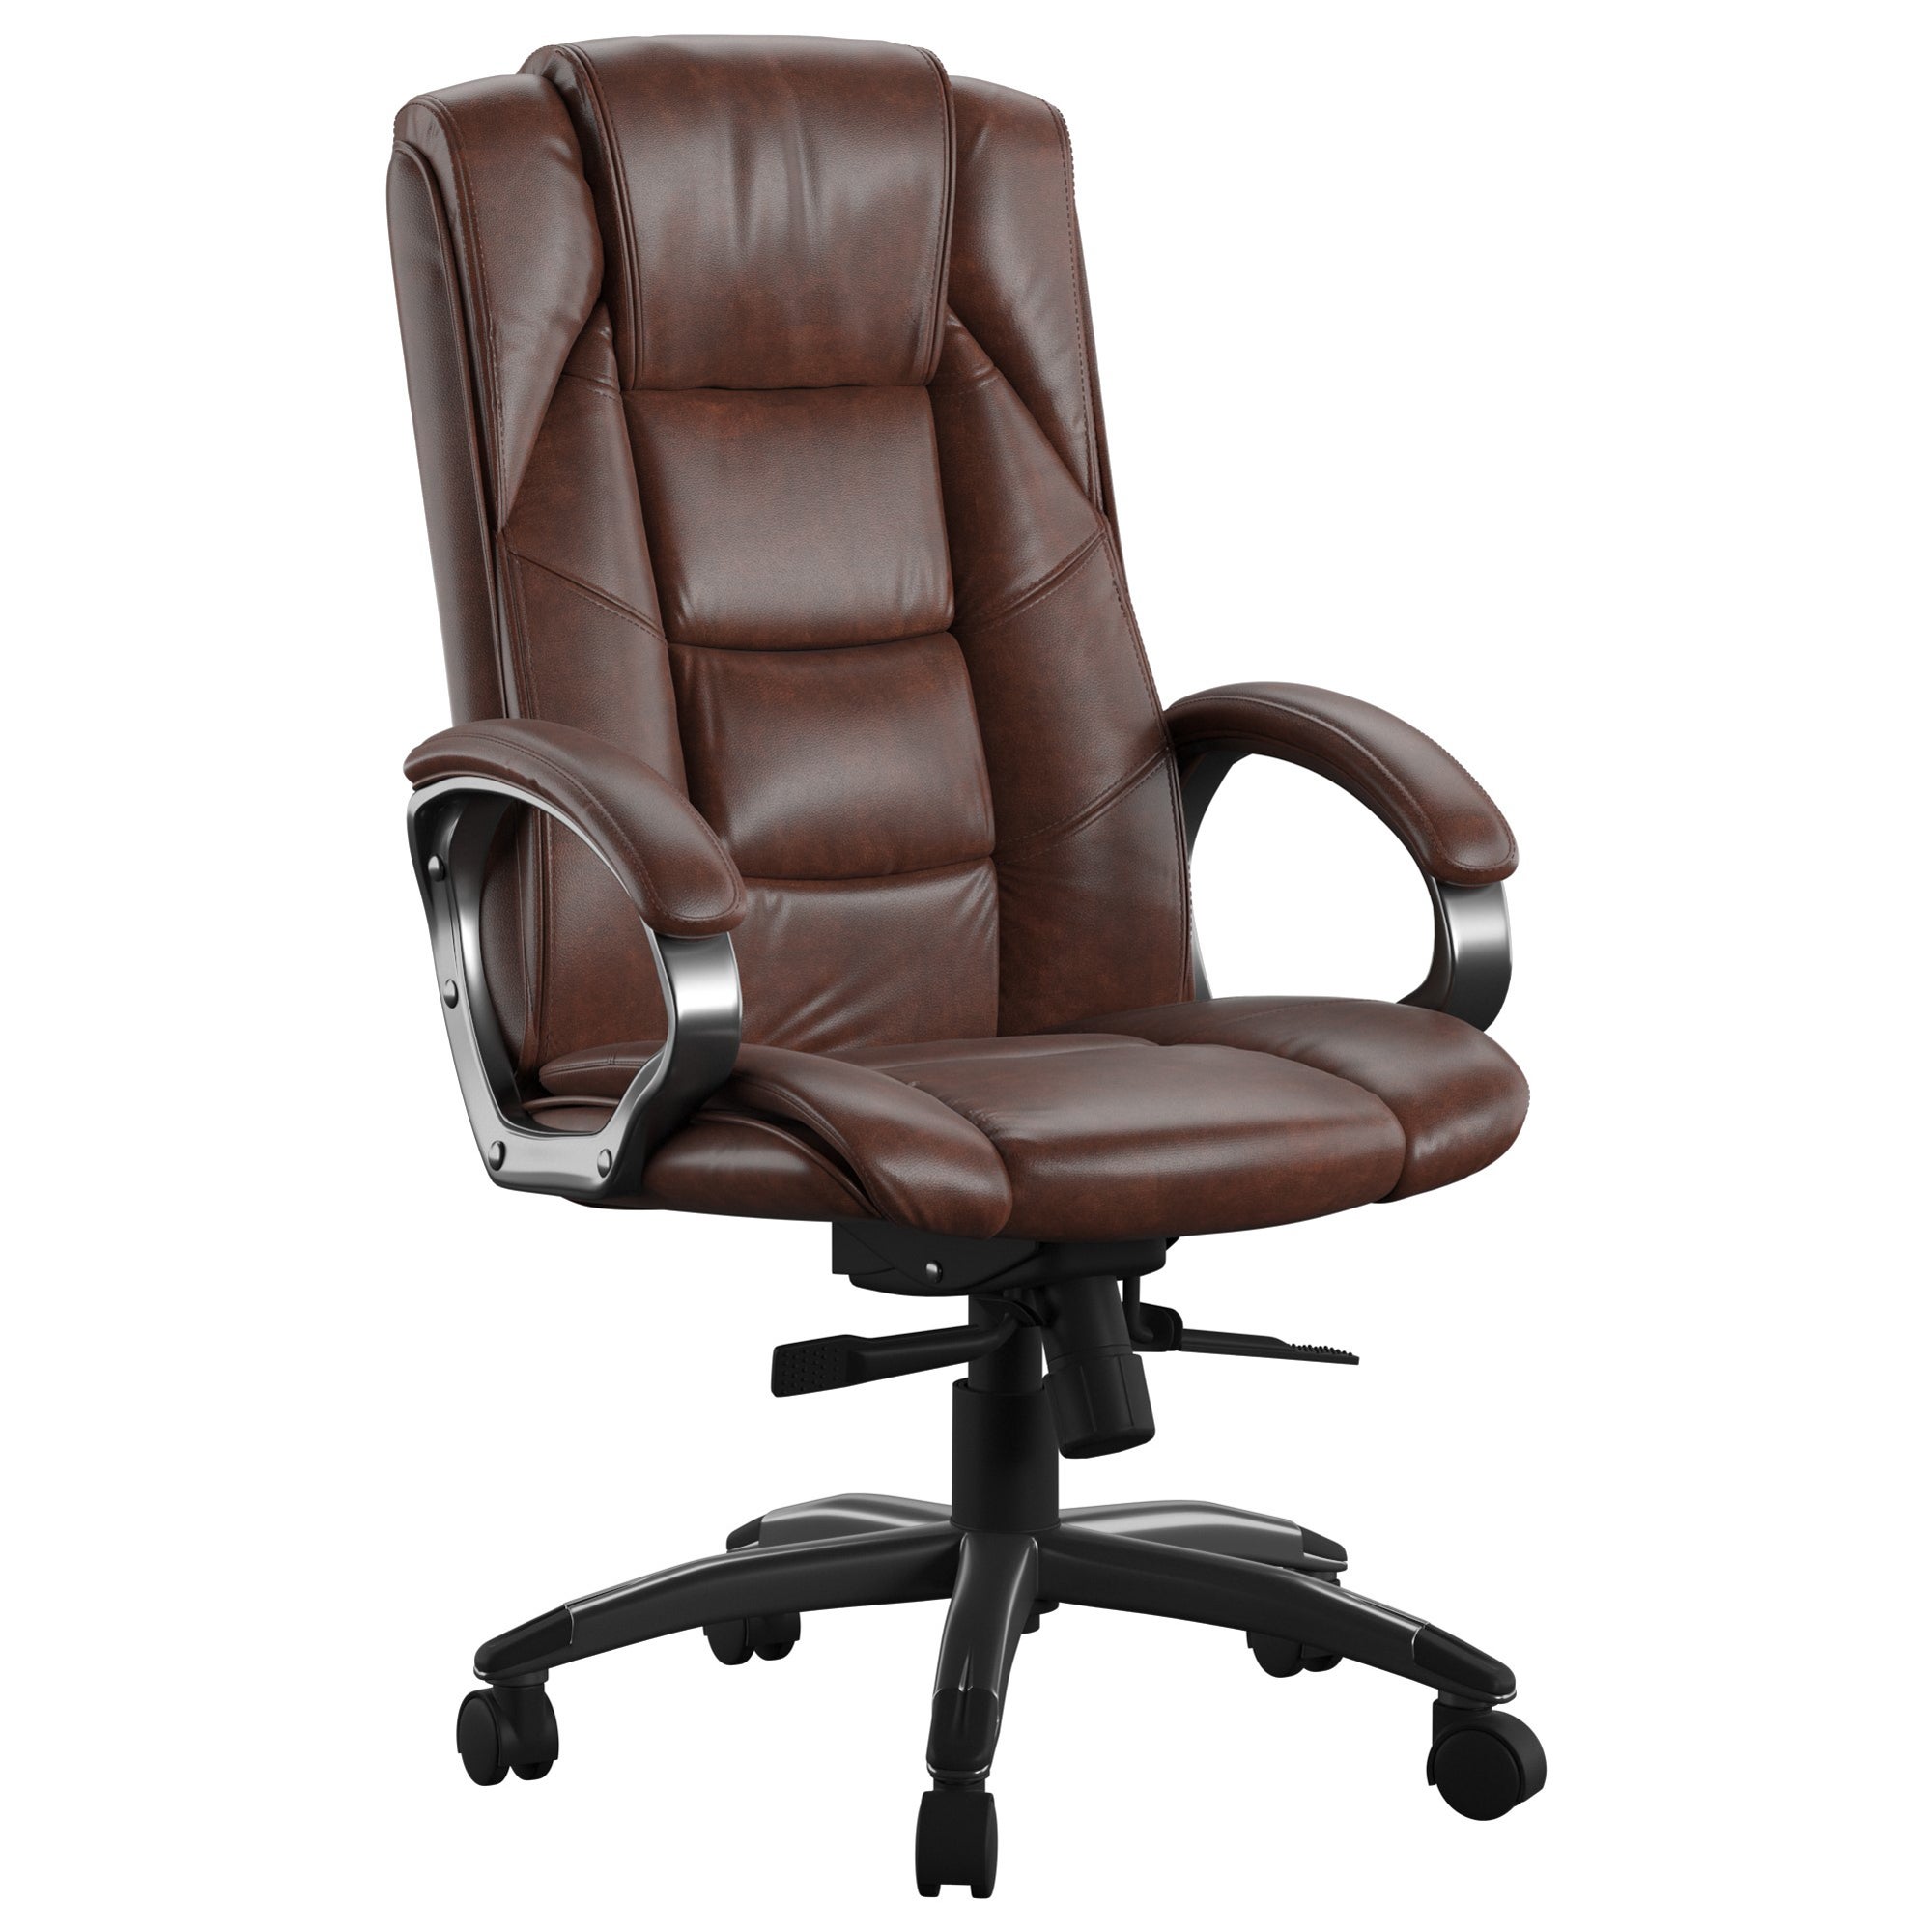 Northland Office Chair Brown